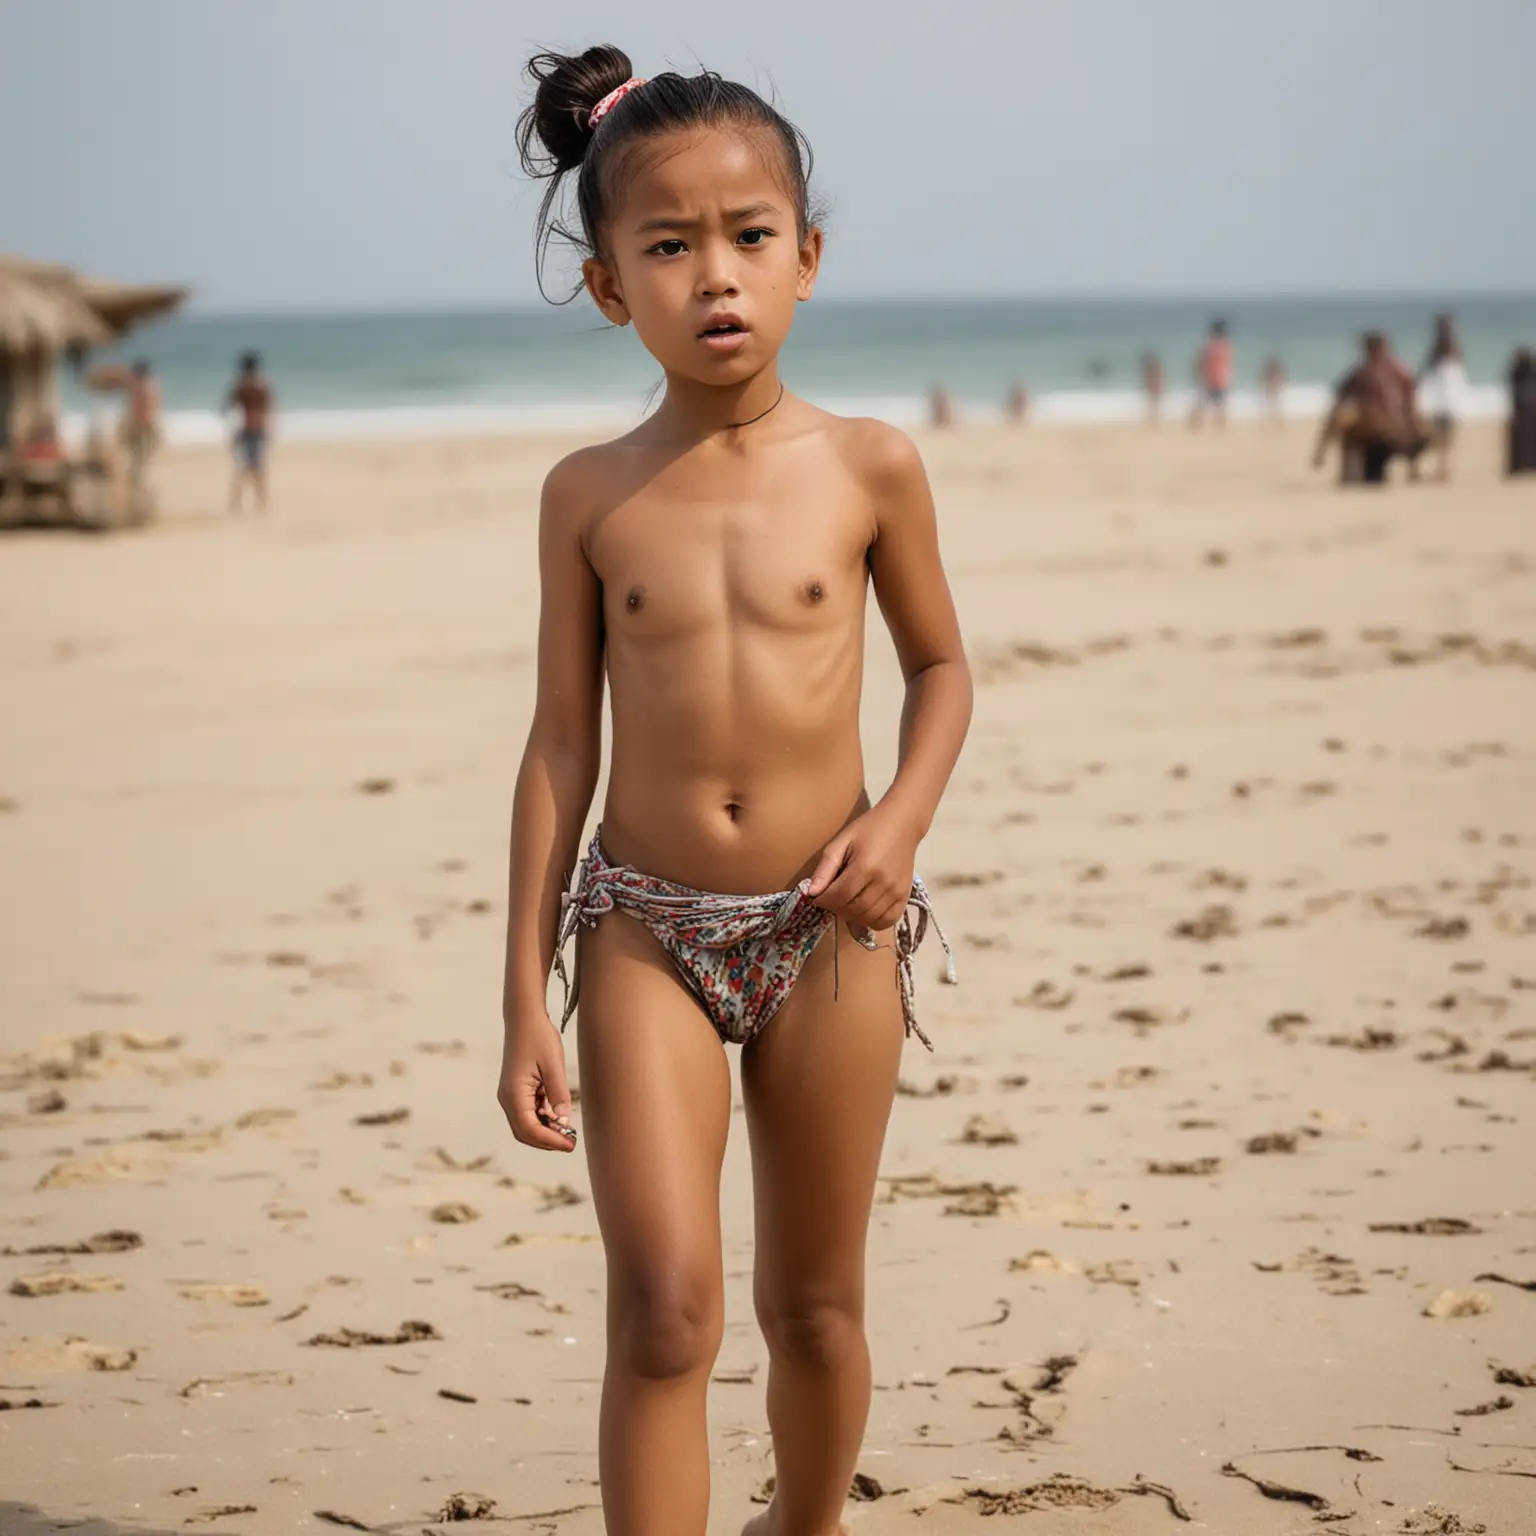 a Indonesian woman aged 8, walking on sand, hair tied up, pouting, wearing a bikini.